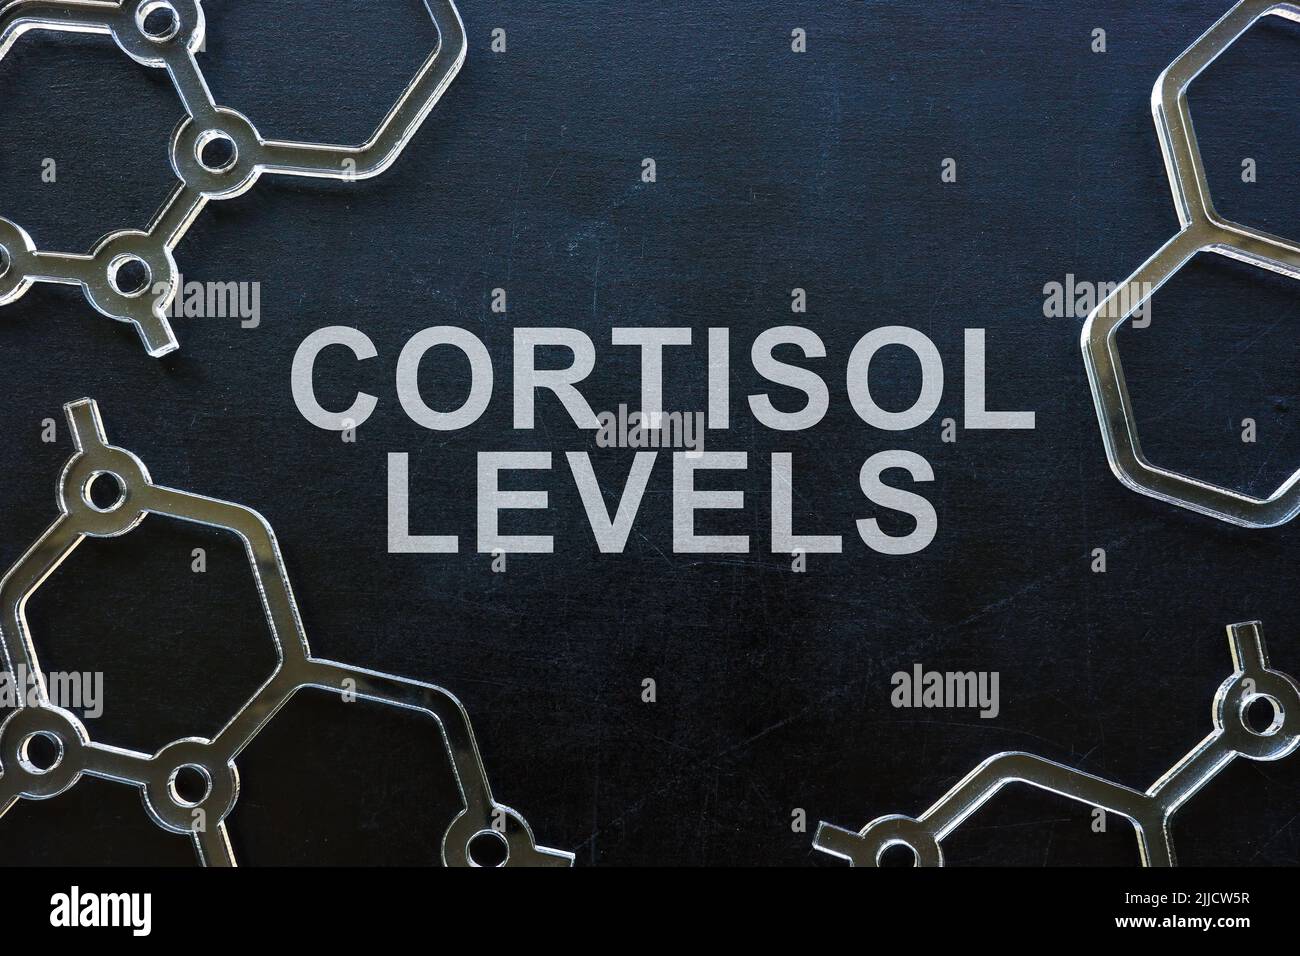 Cortisol levels phrase on the blackboard and molecule models. Stock Photo